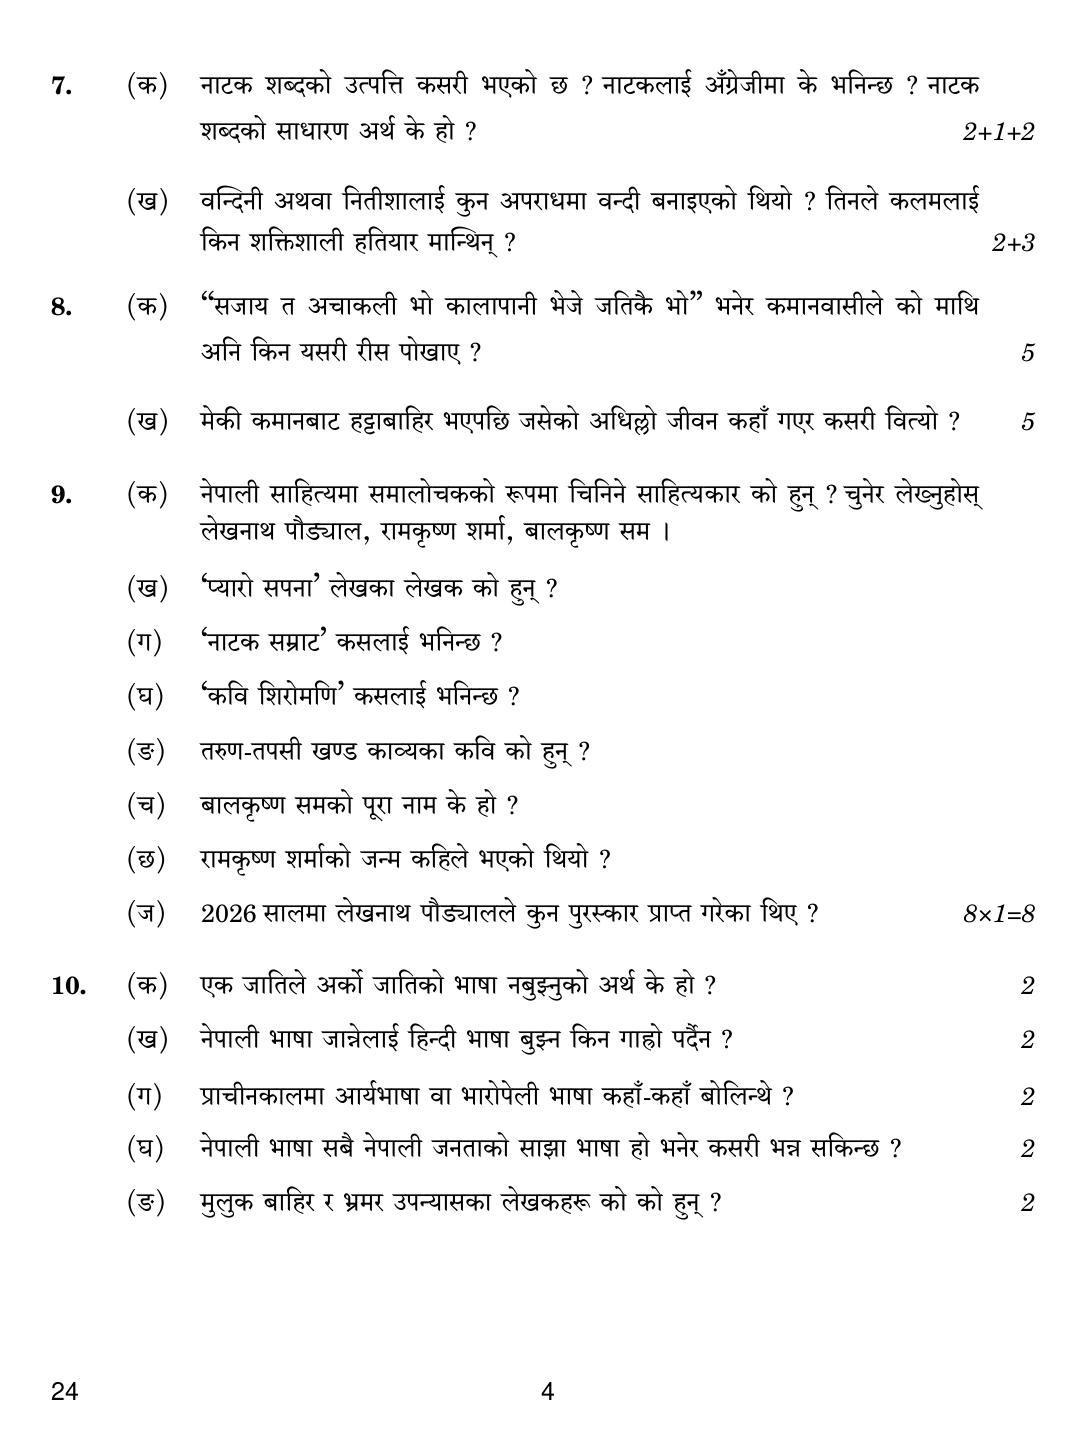 CBSE Class 12 24 NEPALI 2019 Compartment Question Paper - Page 4